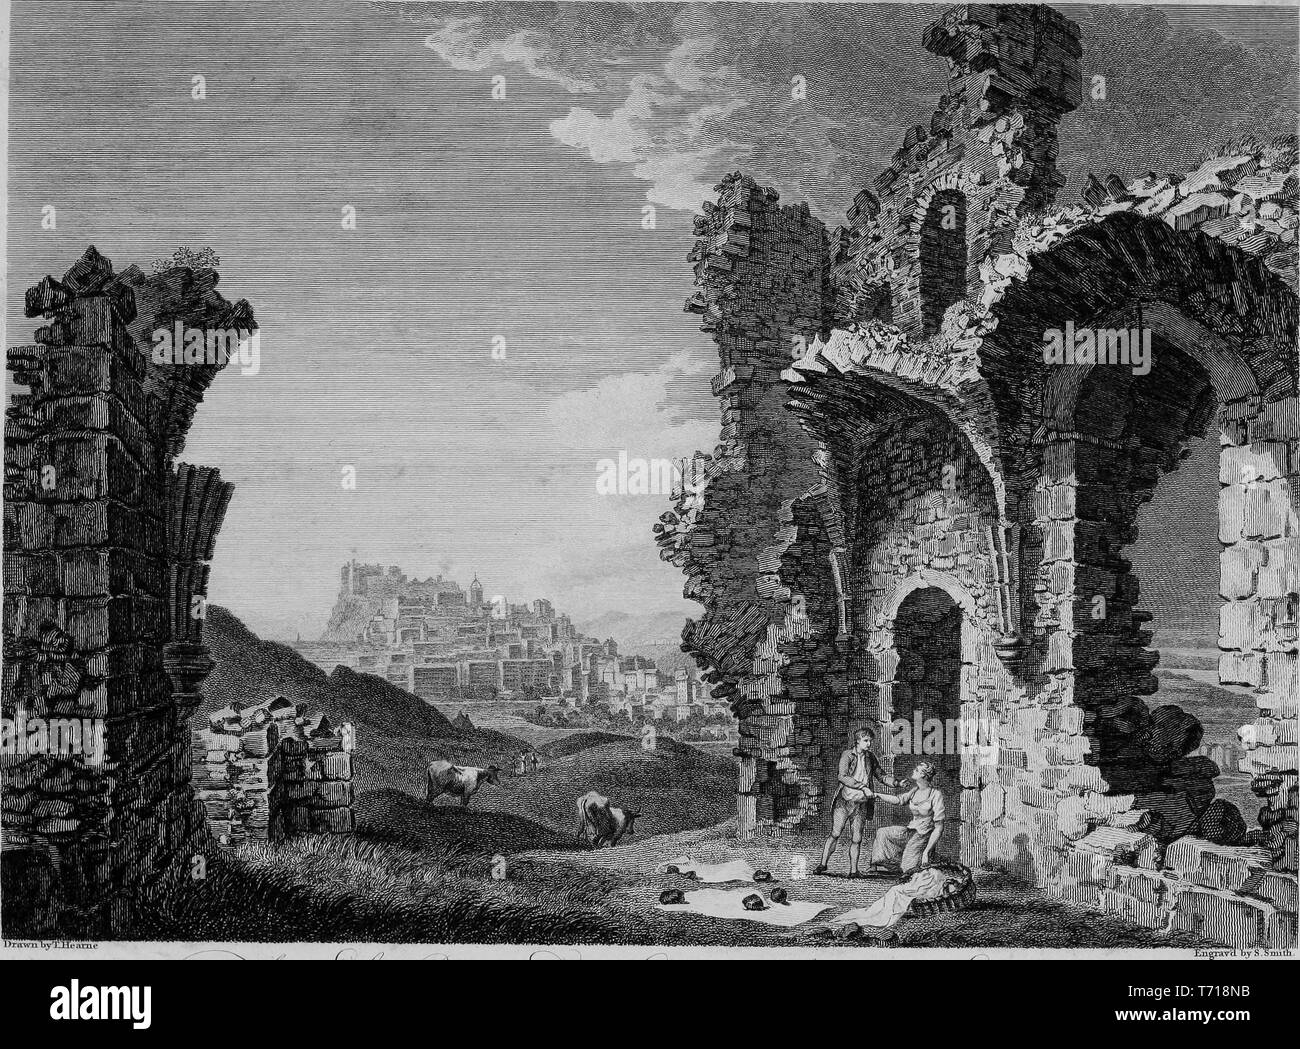 Engraving of the ruins of St. Anthony's Chapel in Scotland, the City of Edinburg in the background, from the book 'Antiquities of Great Britain' by William Byrne and Thomas Hearne, 1807. Courtesy Internet Archive. () Stock Photo